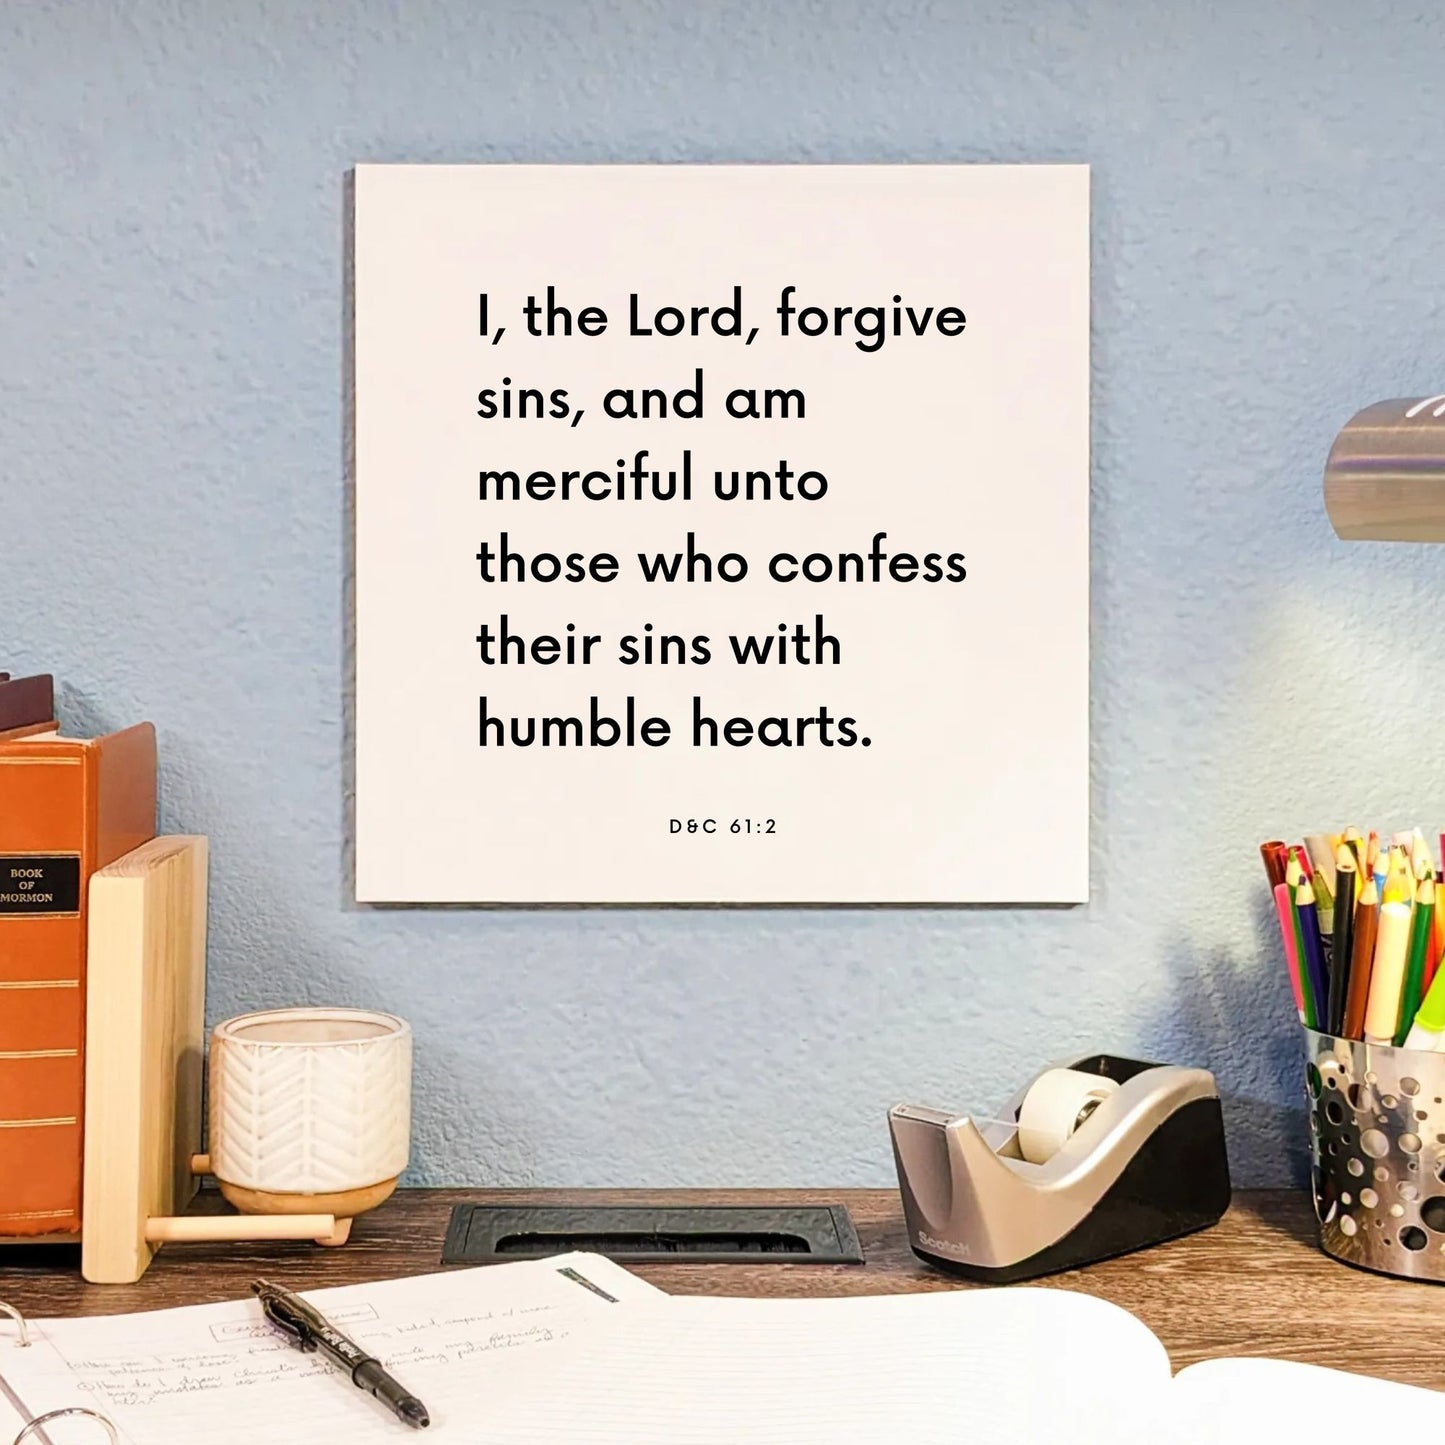 Desk mouting of the scripture tile for D&C 61:2 - "I, the Lord, forgive sins, and am merciful"